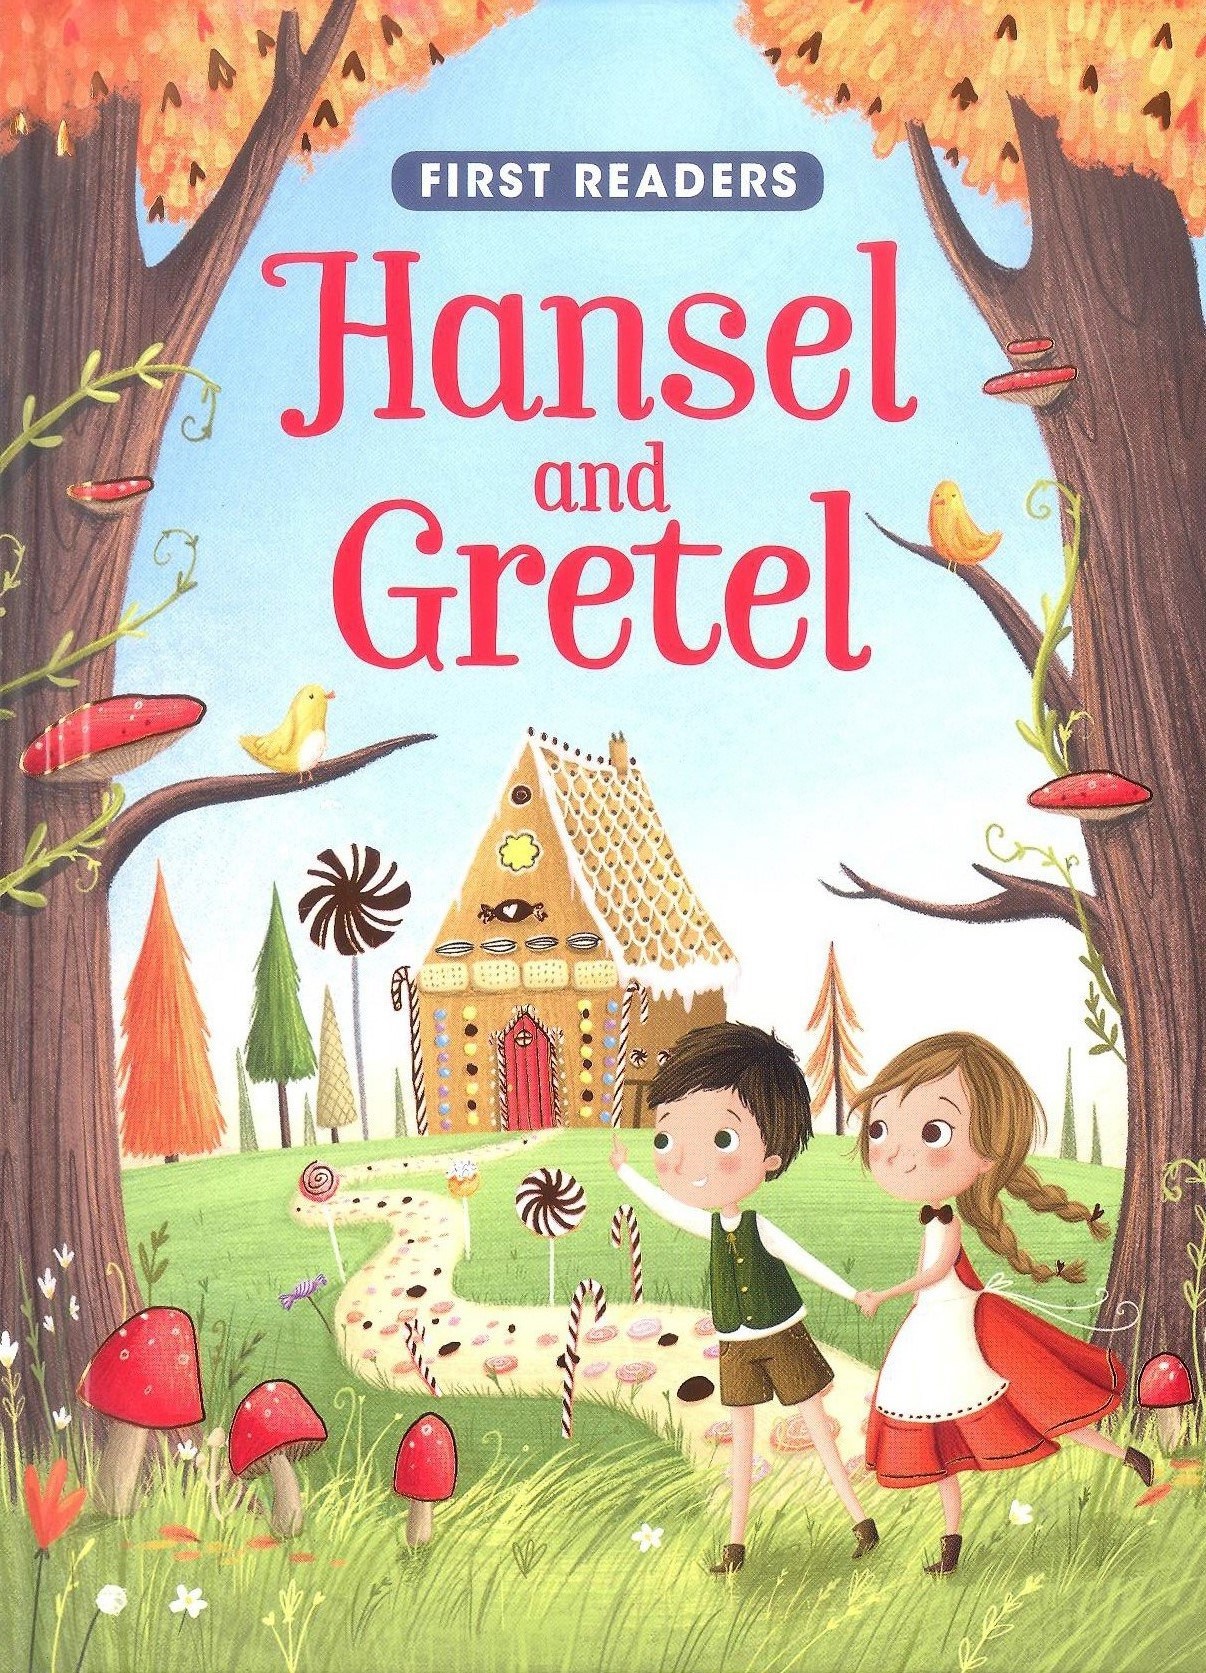 Hansel and Gretel (Brothers Grimm) | Heroes Wiki | FANDOM powered by Wikia1206 x 1673